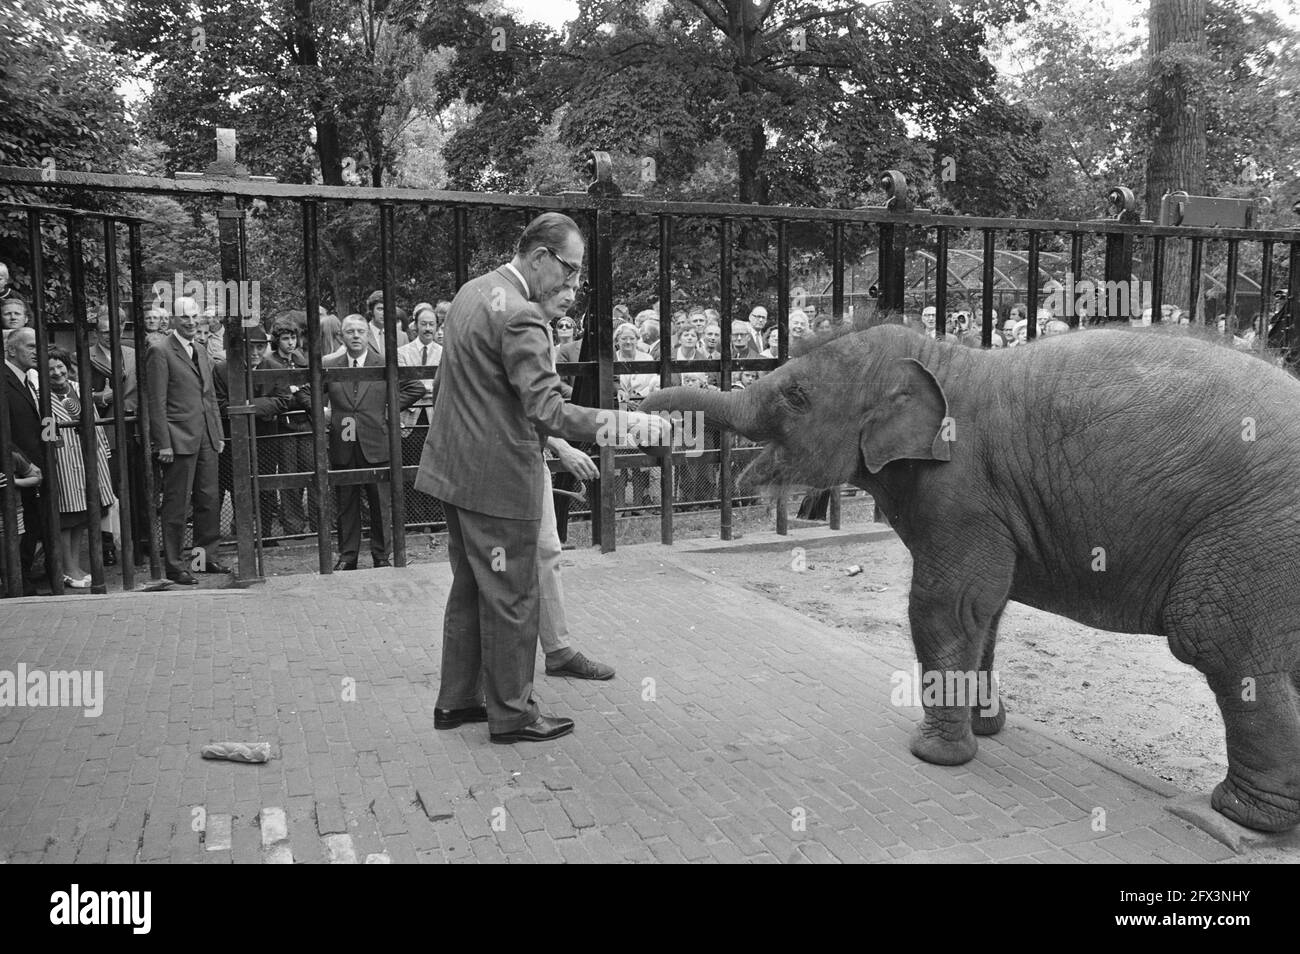 Modernization of elephant enclosures in Artis, Mr. Fock gives piece of bread to elephant, July 26, 1972, zoos, modernizations, The Netherlands, 20th century press agency photo, news to remember, documentary, historic photography 1945-1990, visual stories, human history of the Twentieth Century, capturing moments in time Stock Photo